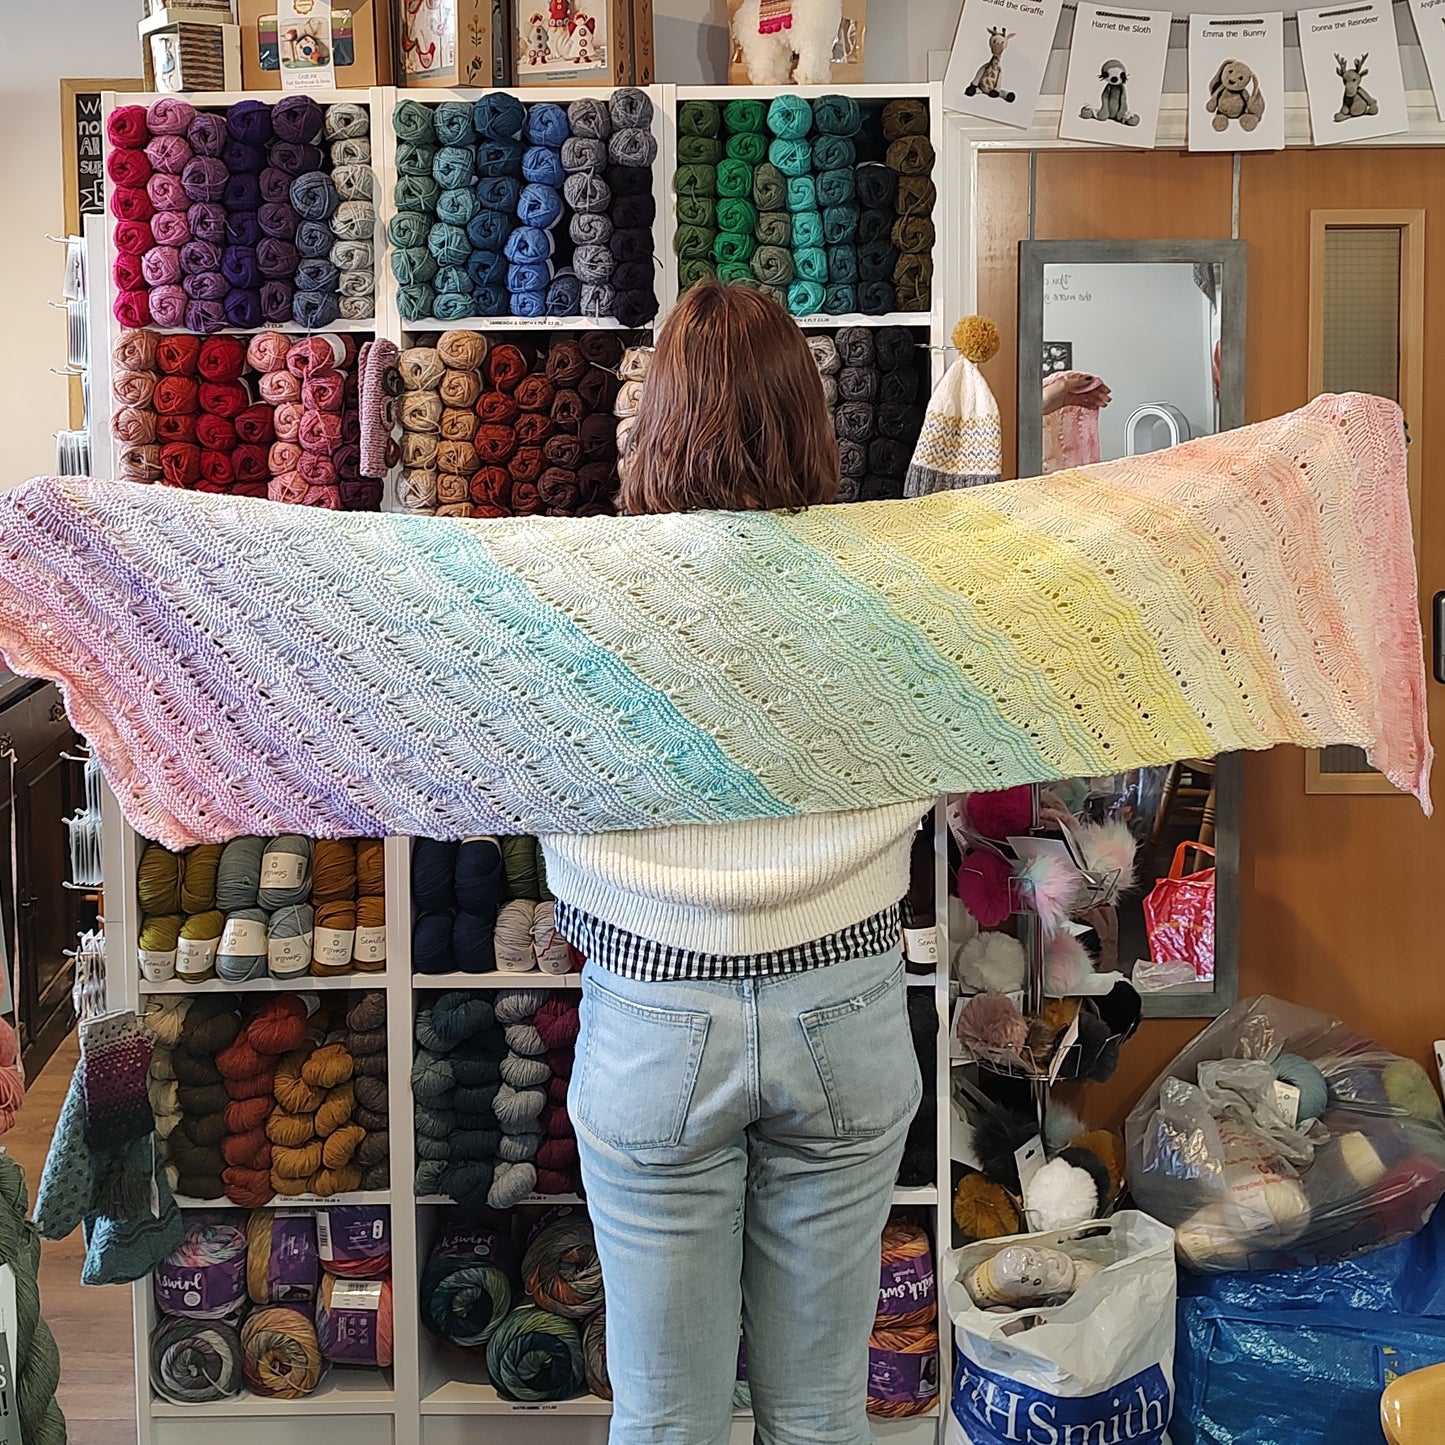 Knitted shawl - Wrap it Real Good by Ambah Obrien